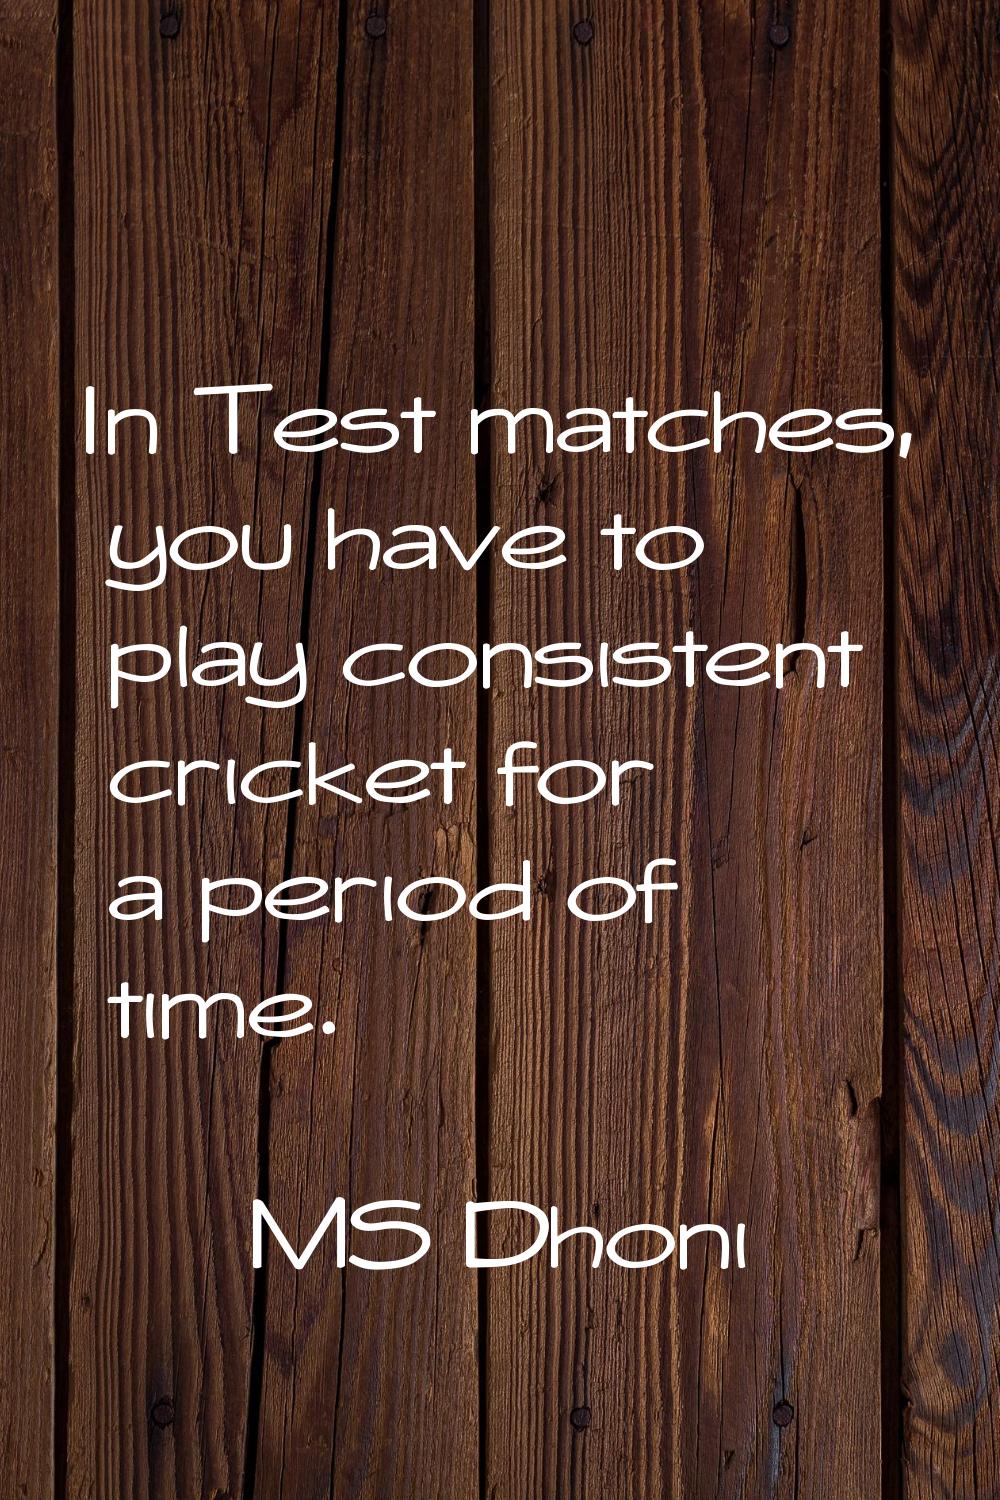 In Test matches, you have to play consistent cricket for a period of time.